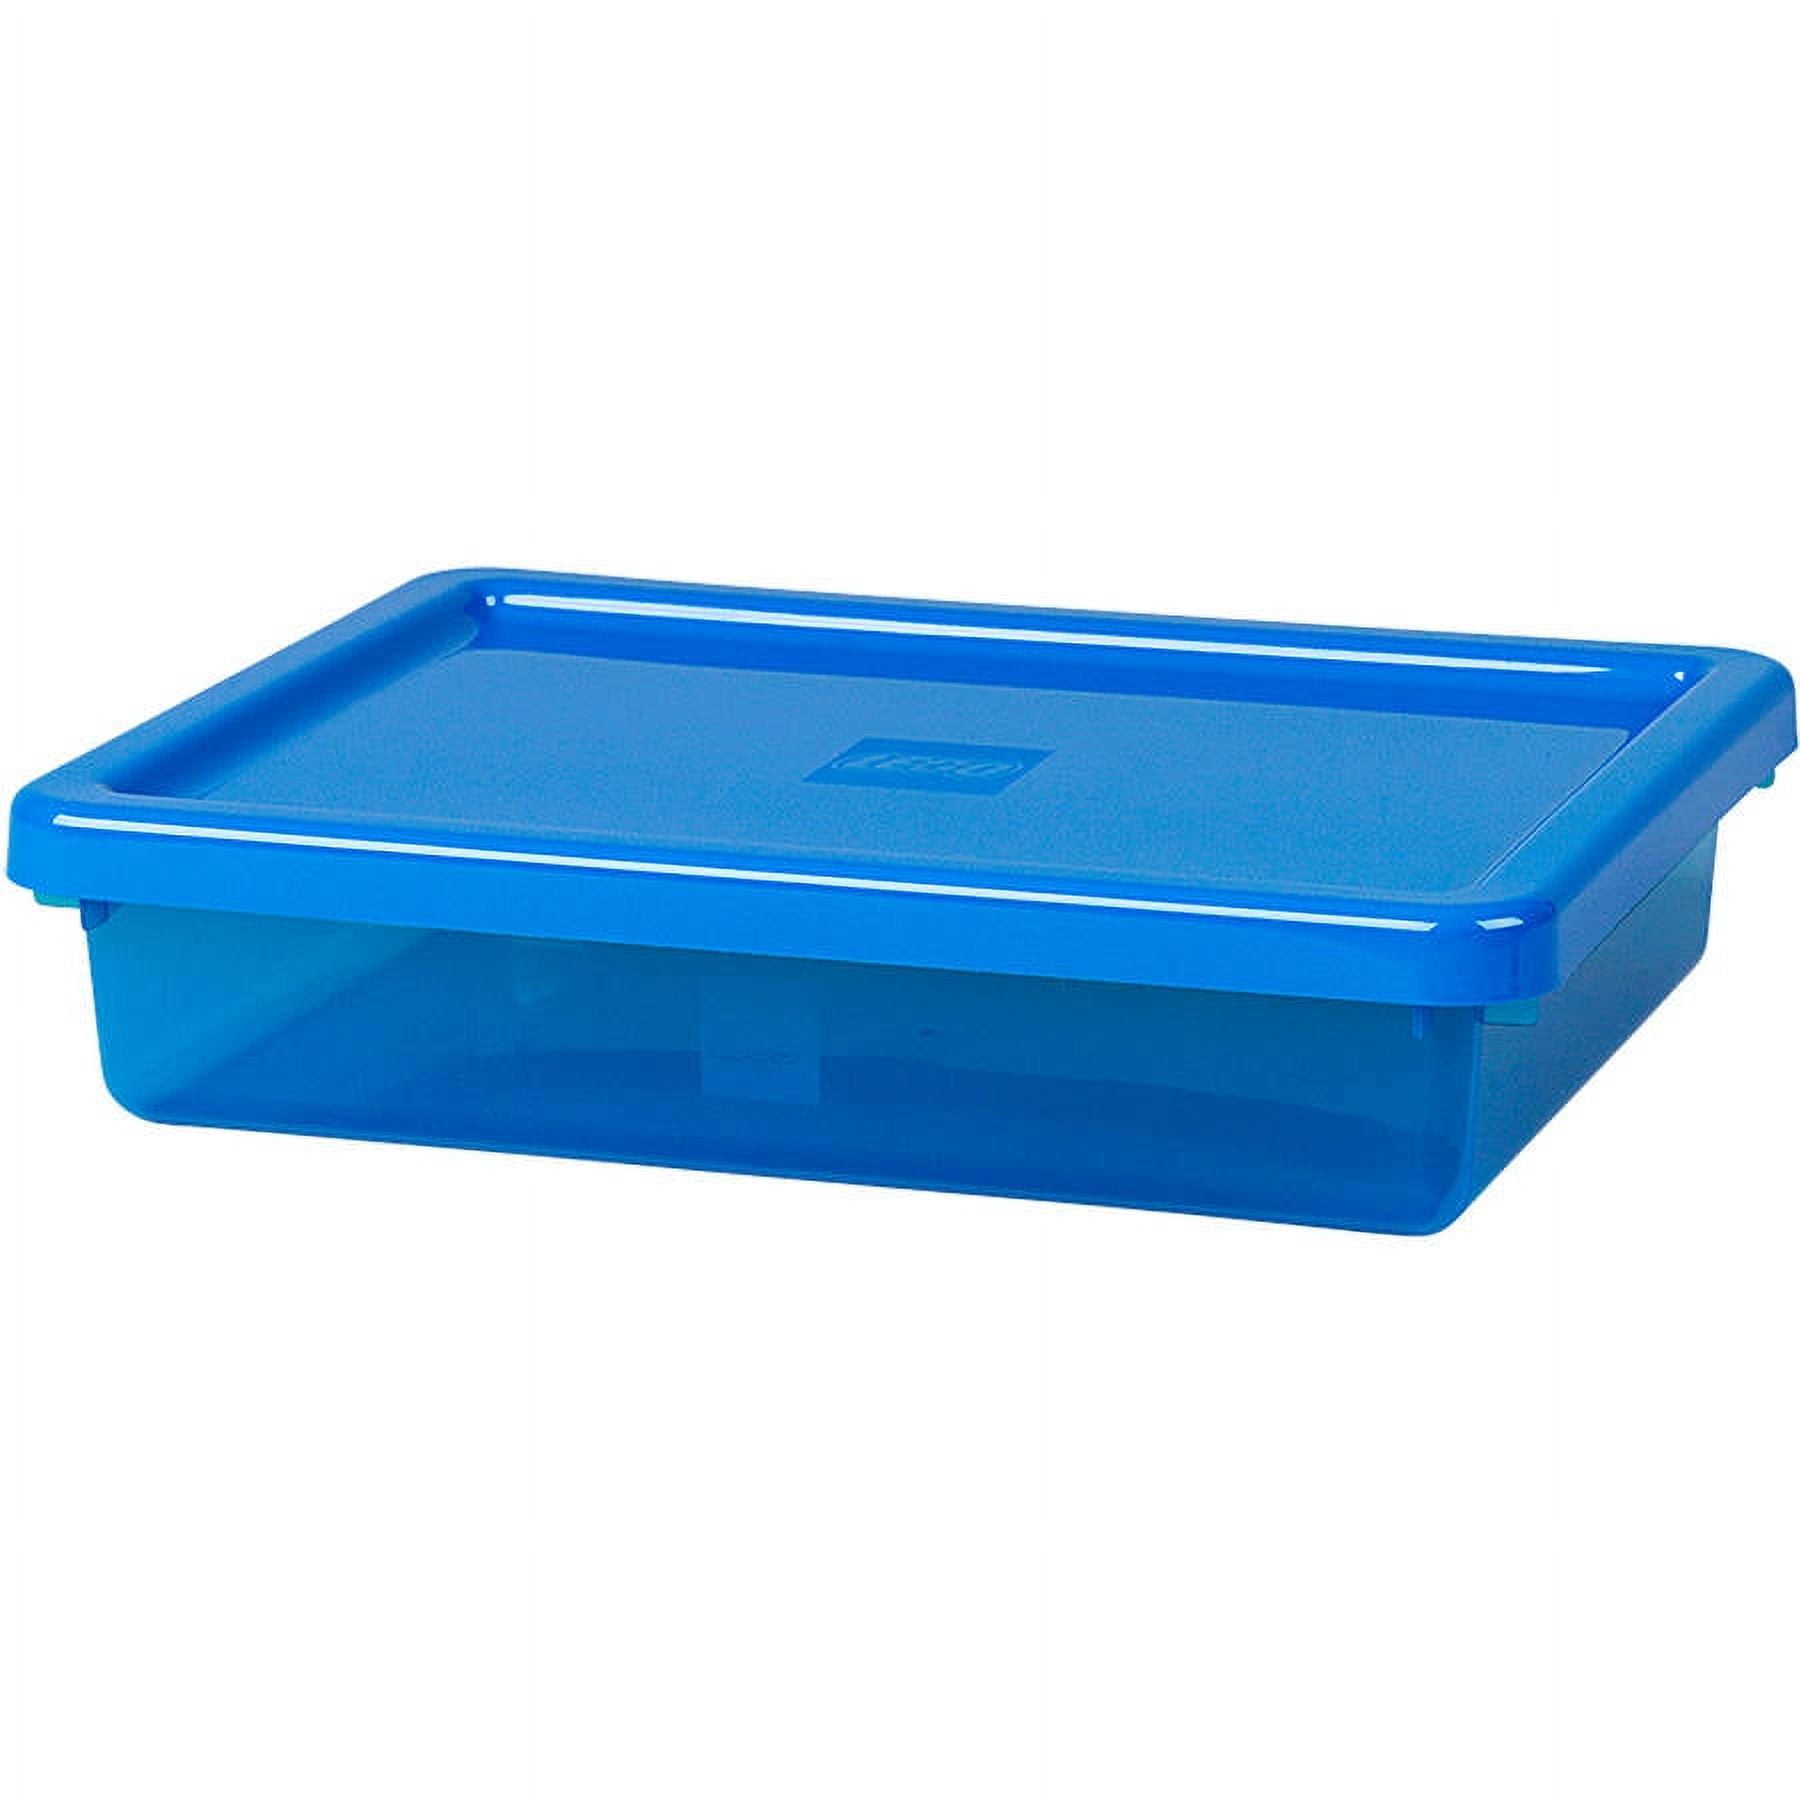 LEGO Box/Tub ONLY 6166 Empty Hard Plastic Blue Storage Container & Lid Box  2010